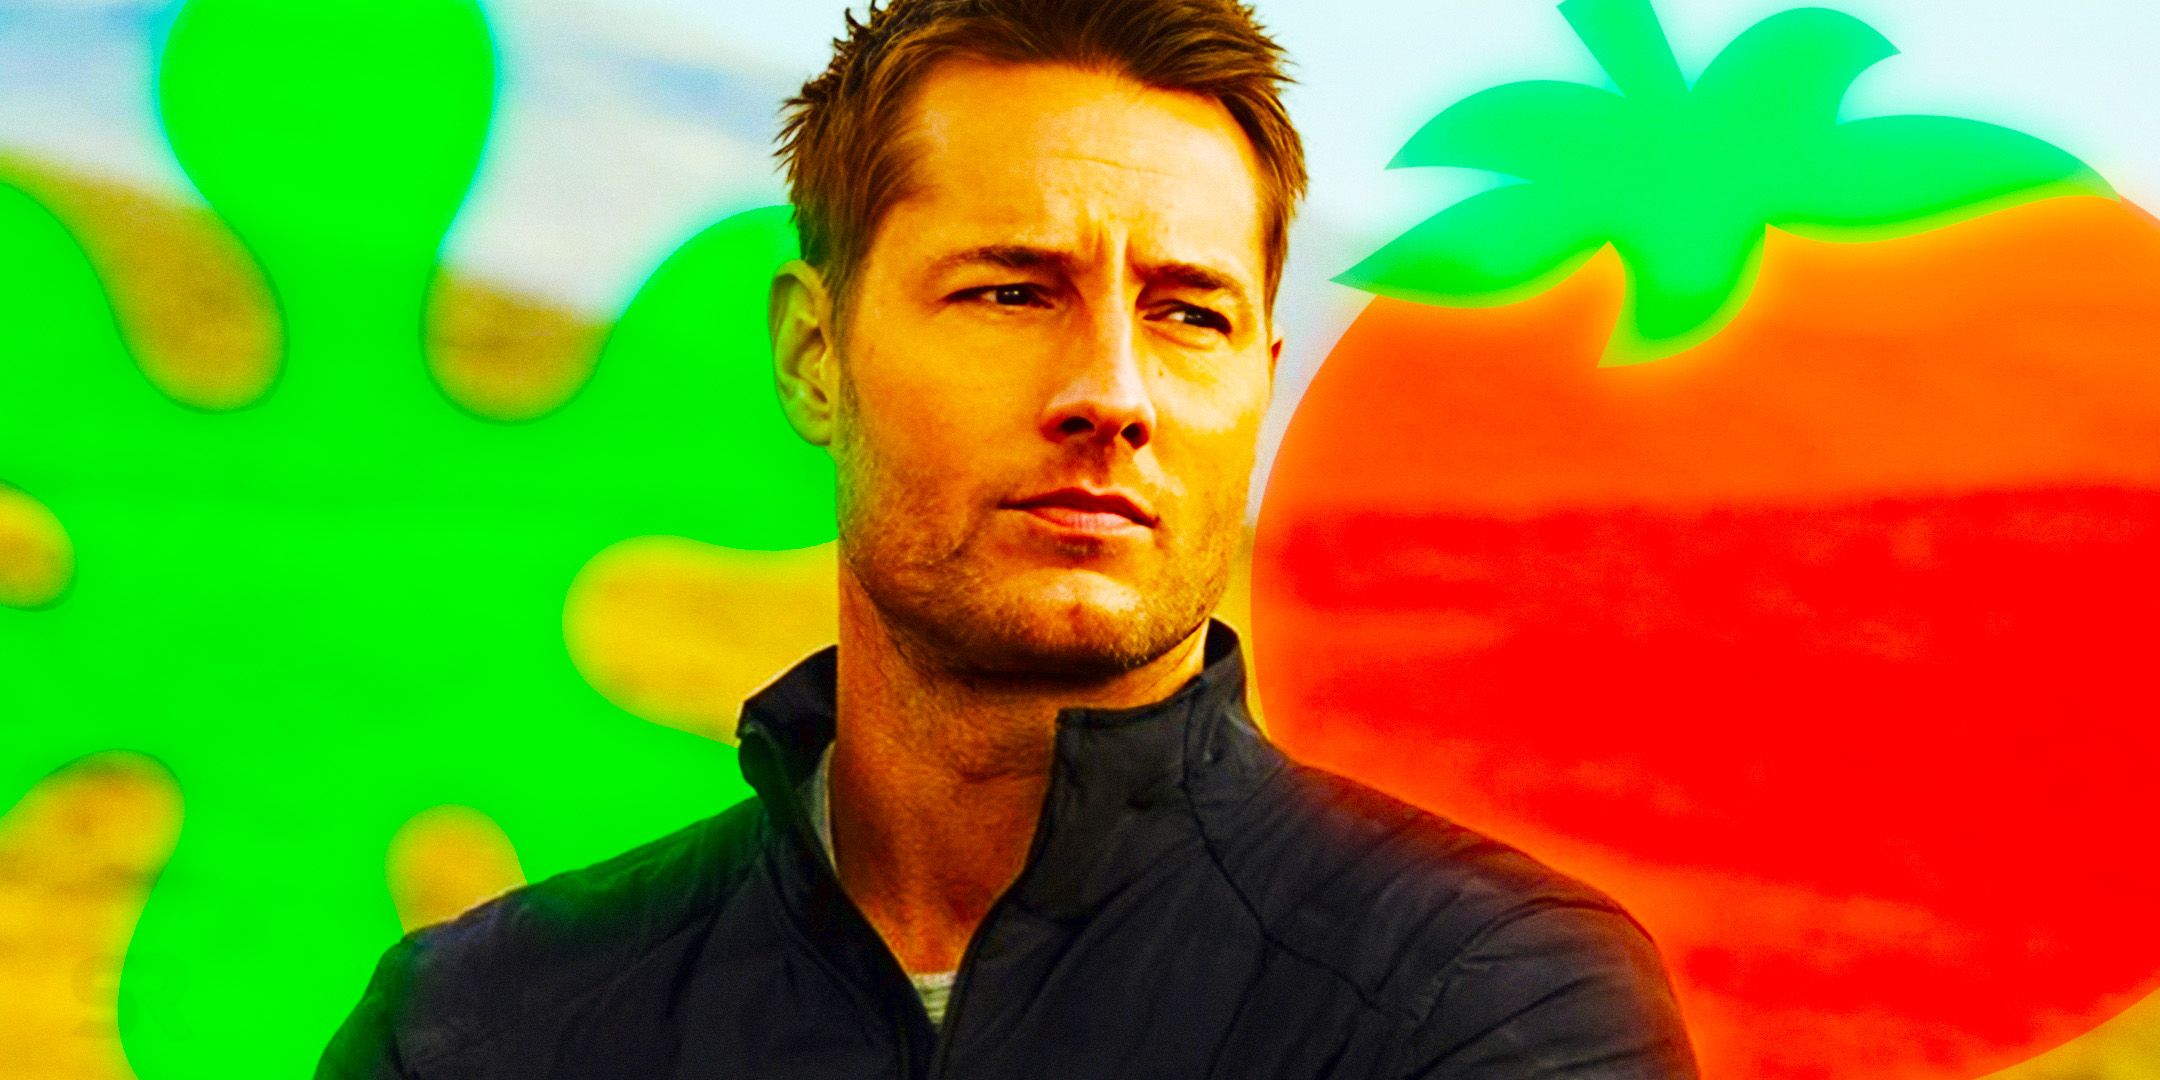 Justin Hartley as Colter Shaw in Tracker on CBS.